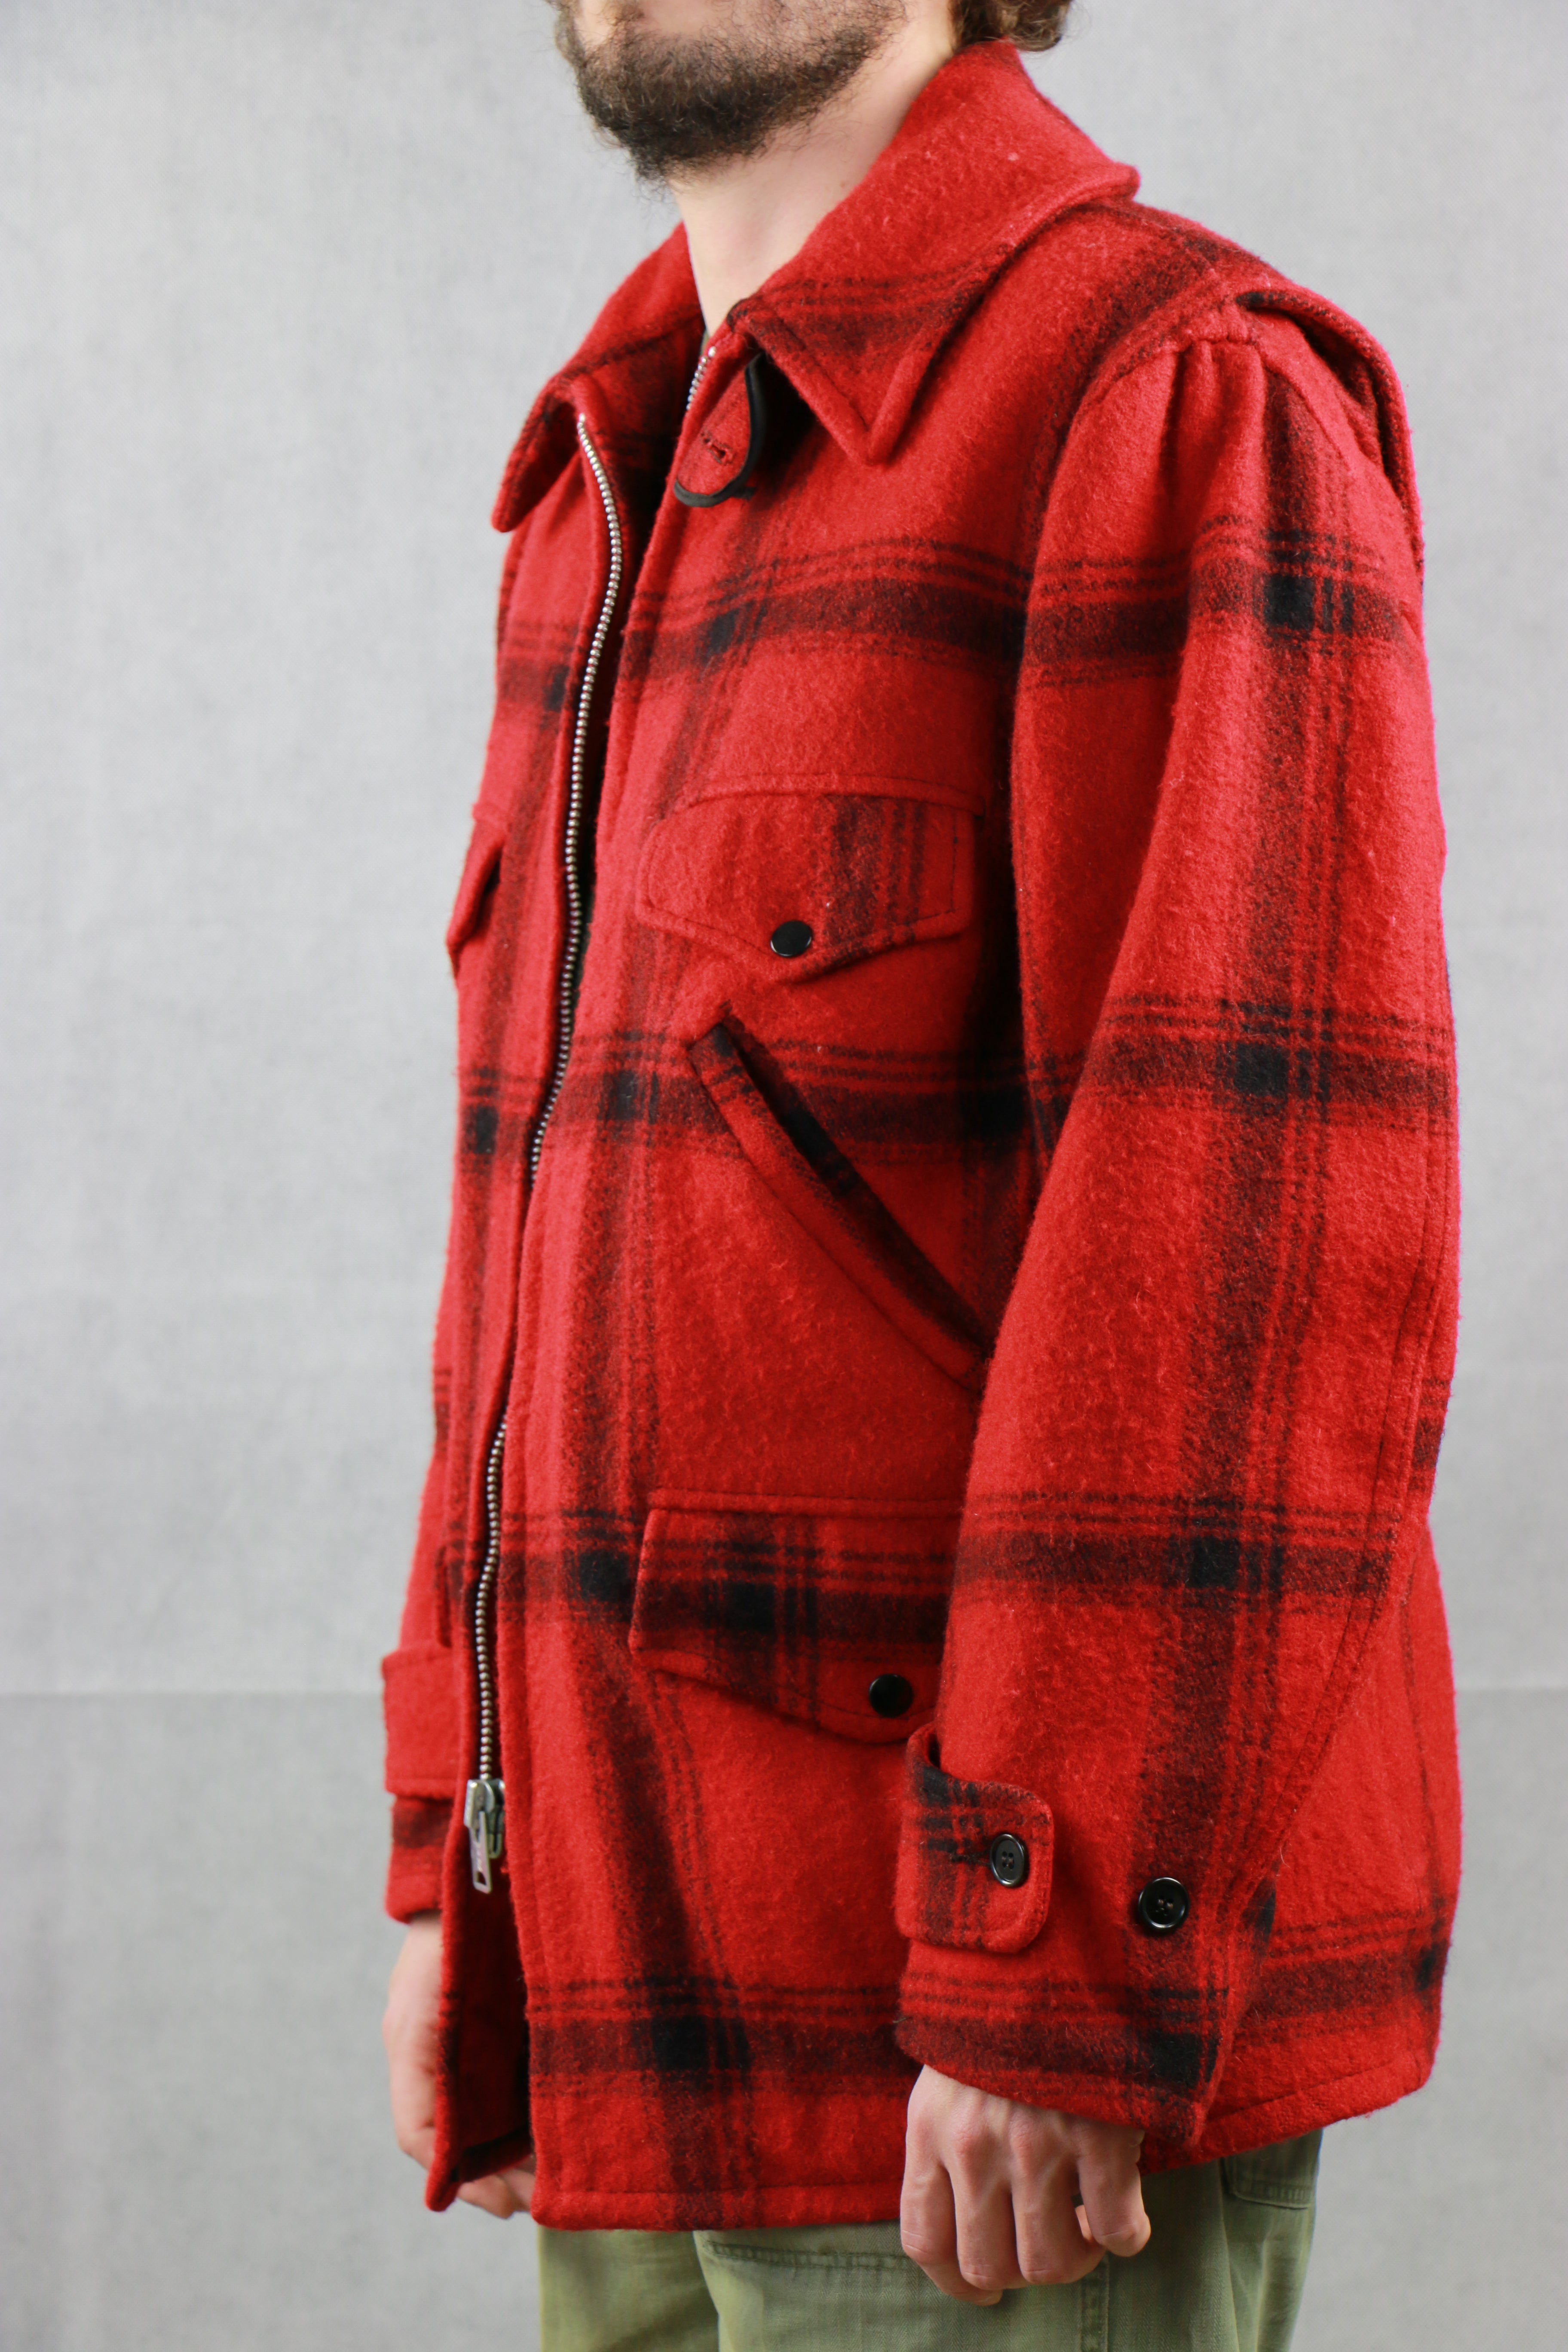 Midwest company 60's Wool Plaid Hunting Jacket ~ Vintage Store